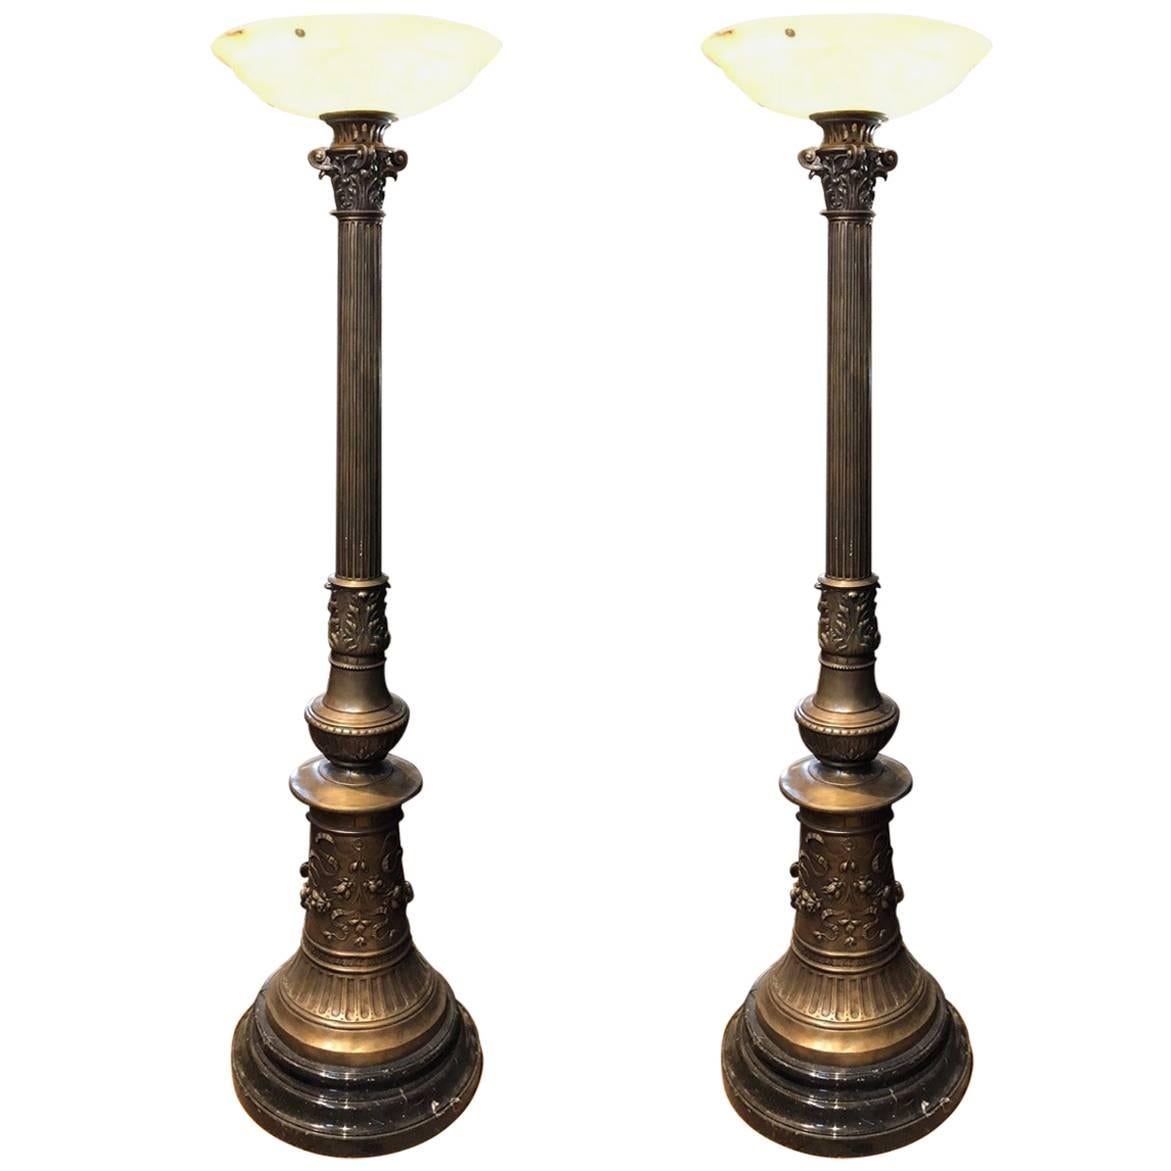 Magnificent Pair of Ornate Bronze Torchieres Floor Lamps with Alabaster Shades